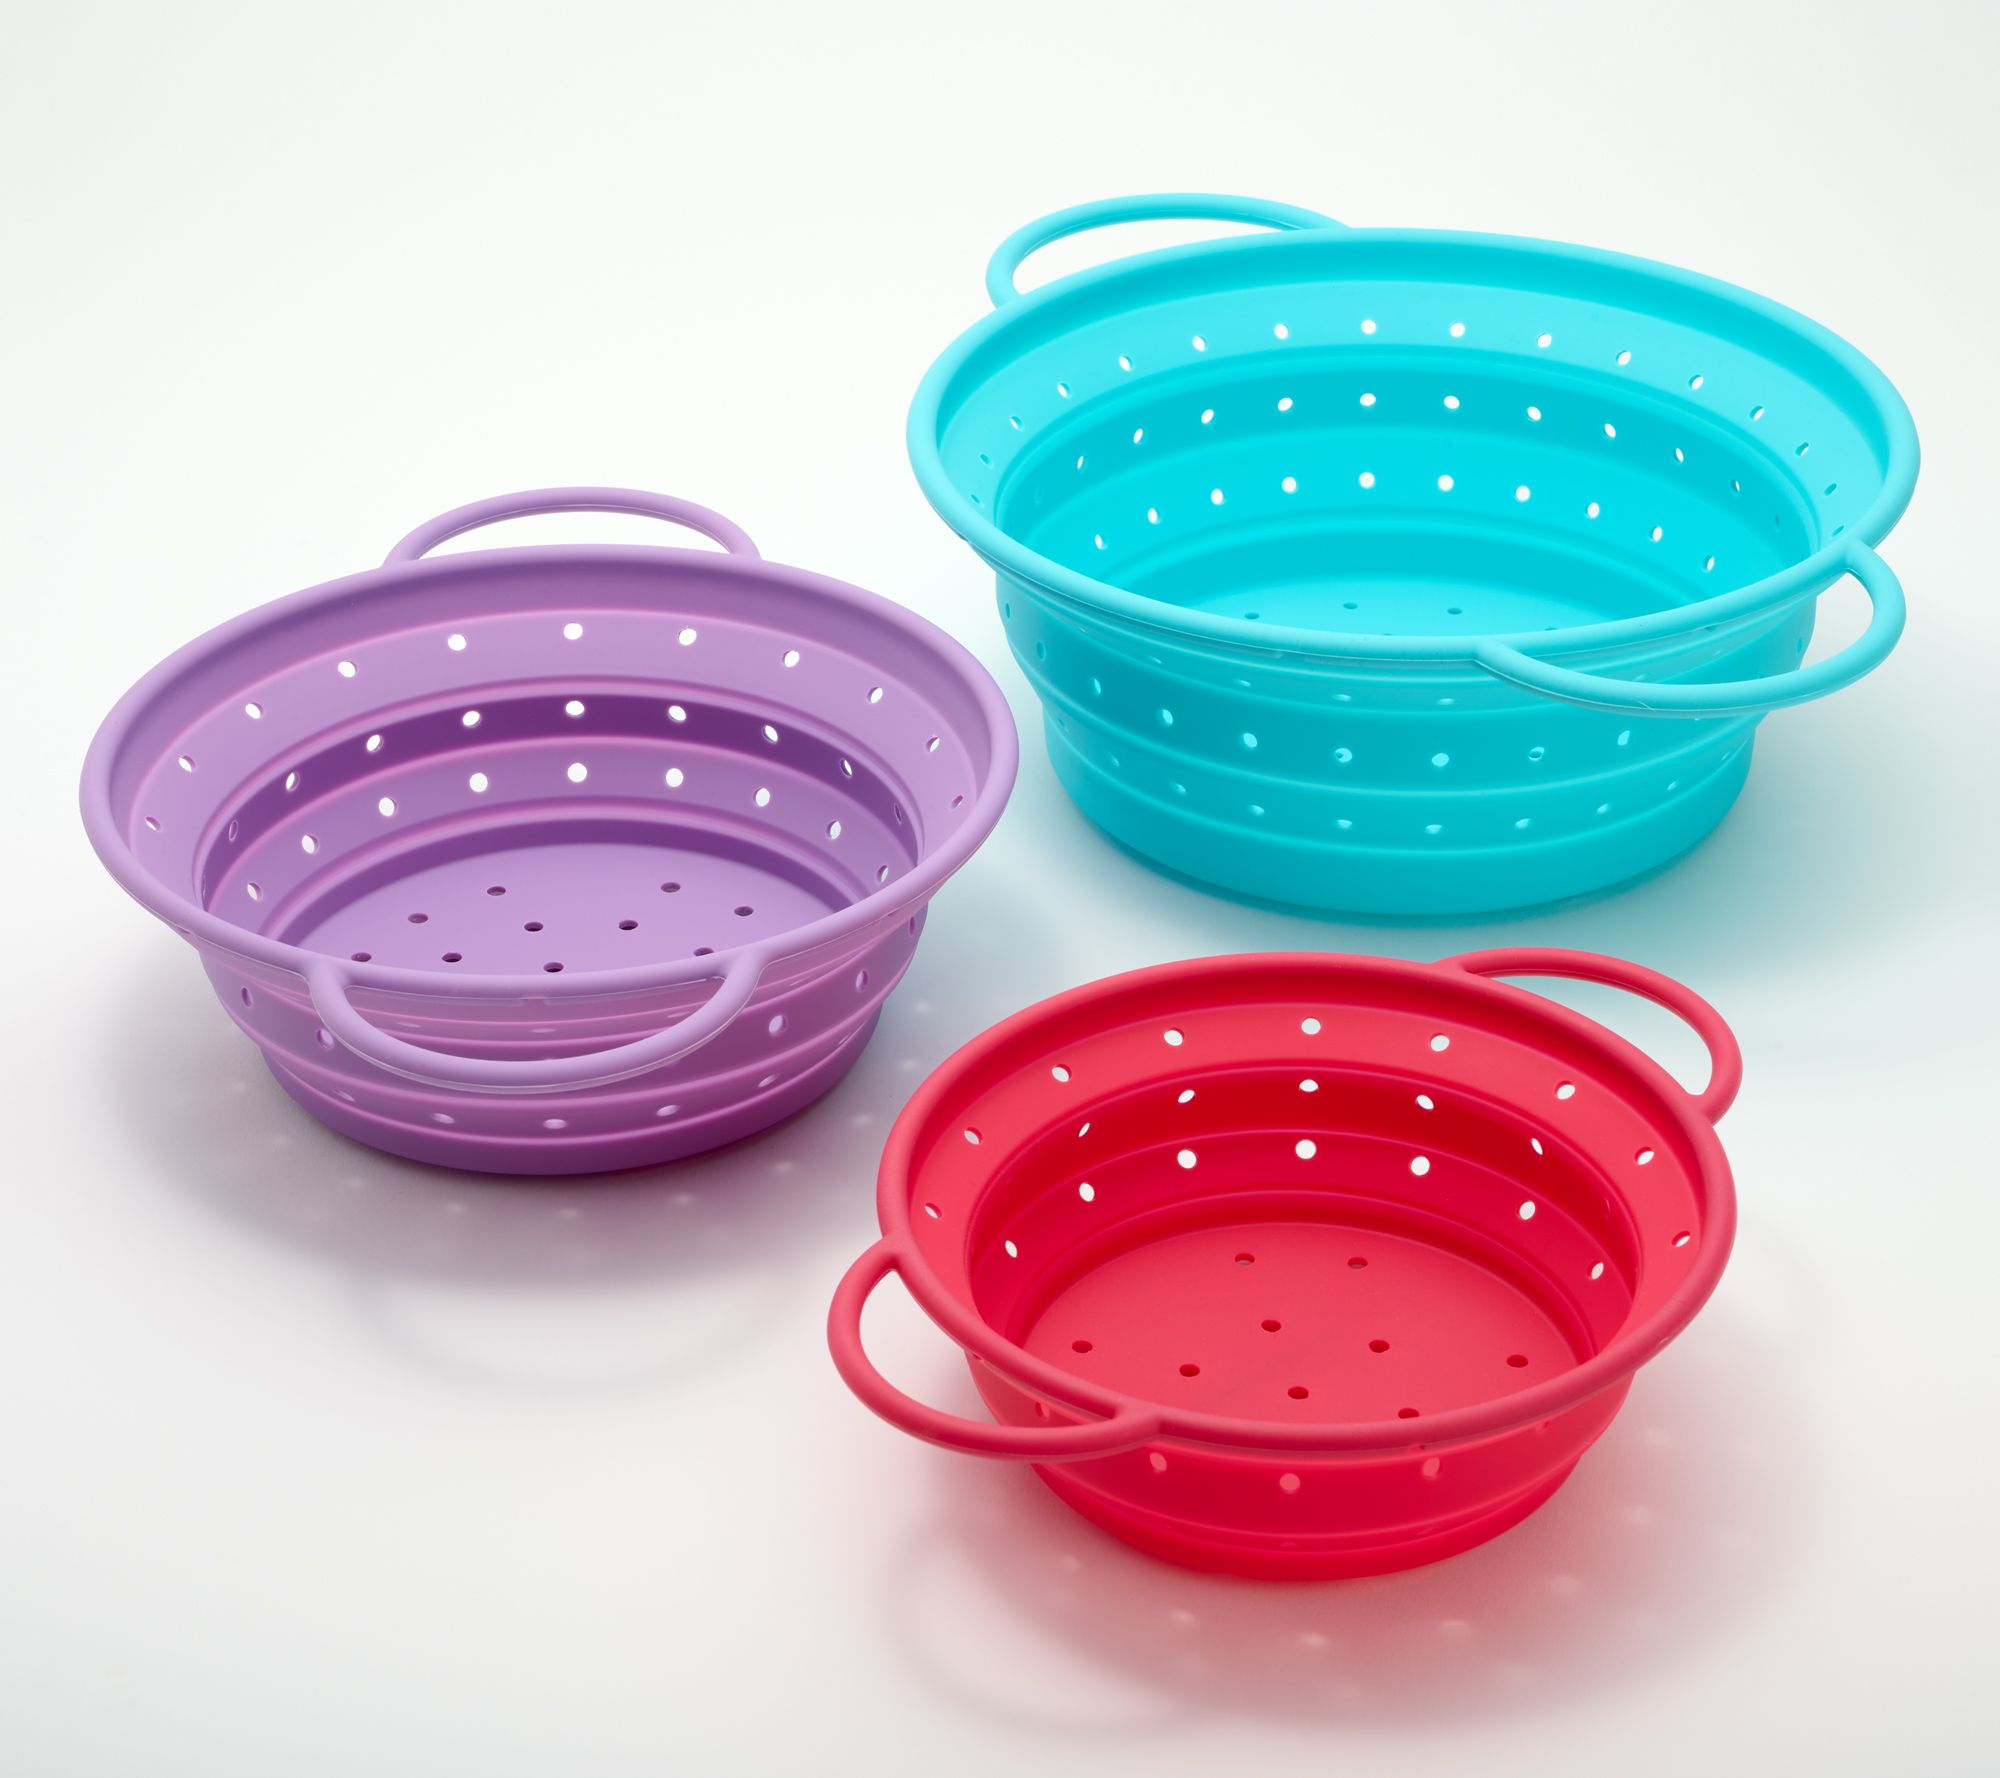 Prepology 3-Piece Collapsible Silicone Strainer Set 